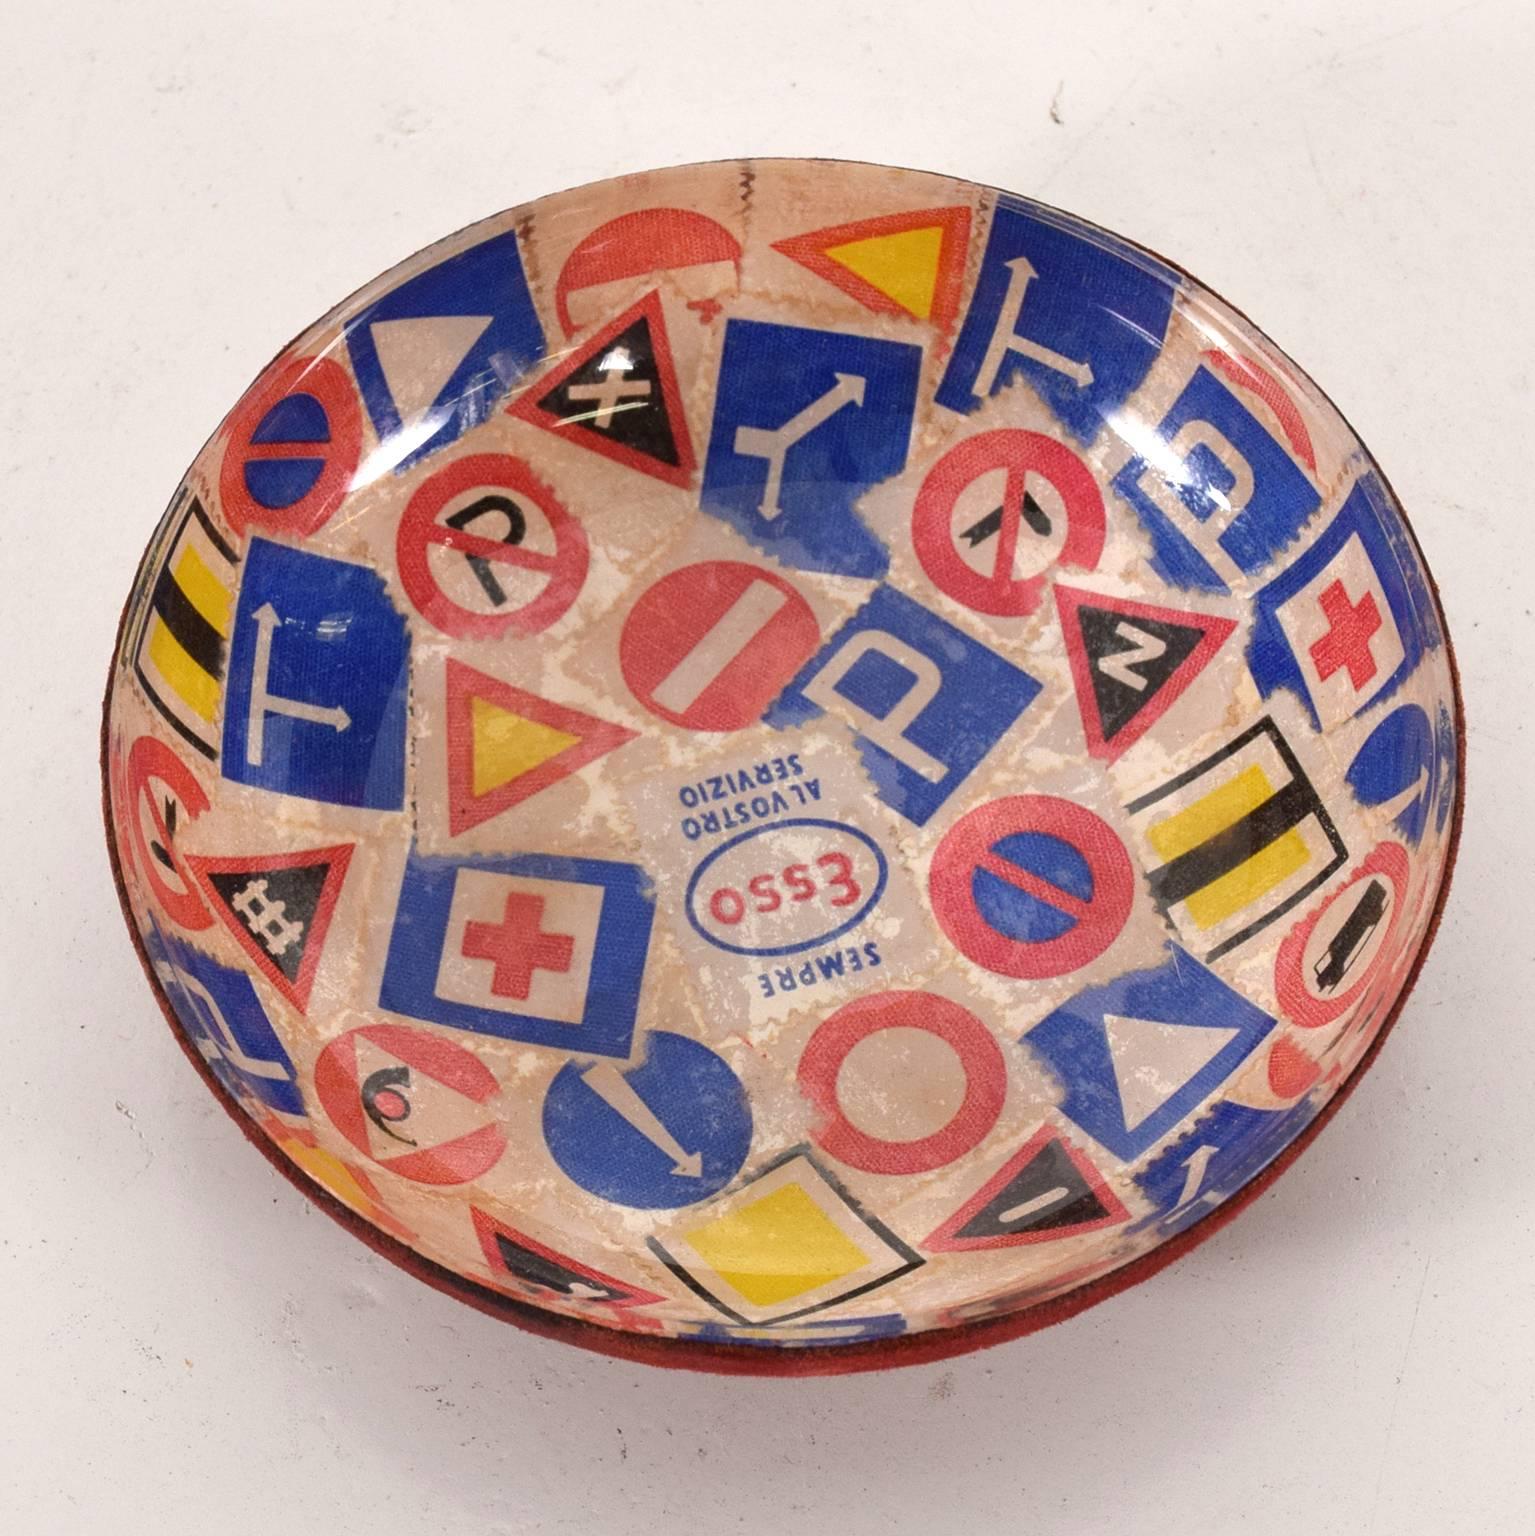 For your consideration, a vintage decorative bowl, catch-all. Made in Italy. Metal covered with antique advertising stamps displaying road signs and an ESSO logo an slogan 